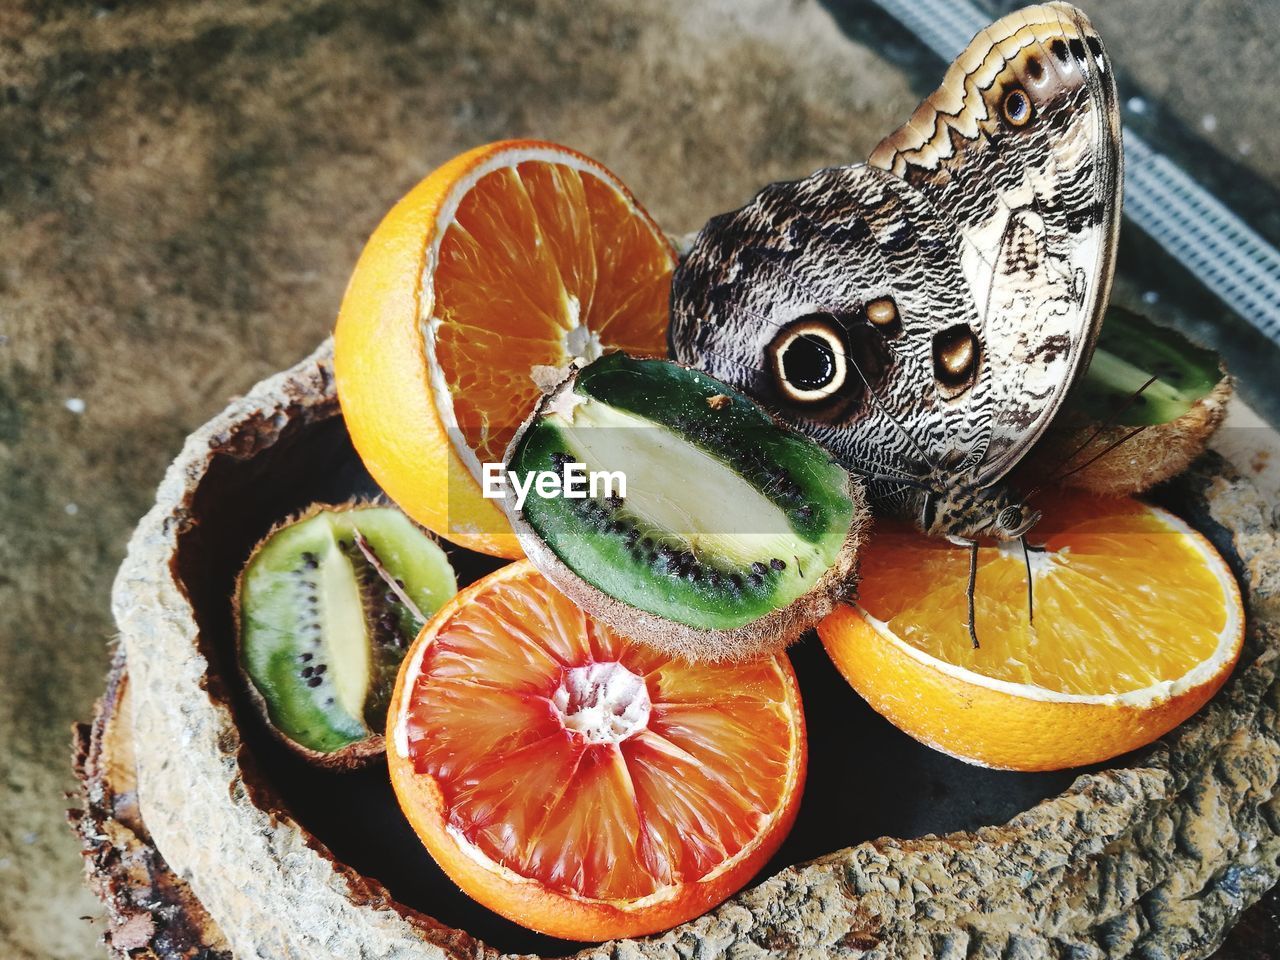 Close-up of butterfly on orange fruit